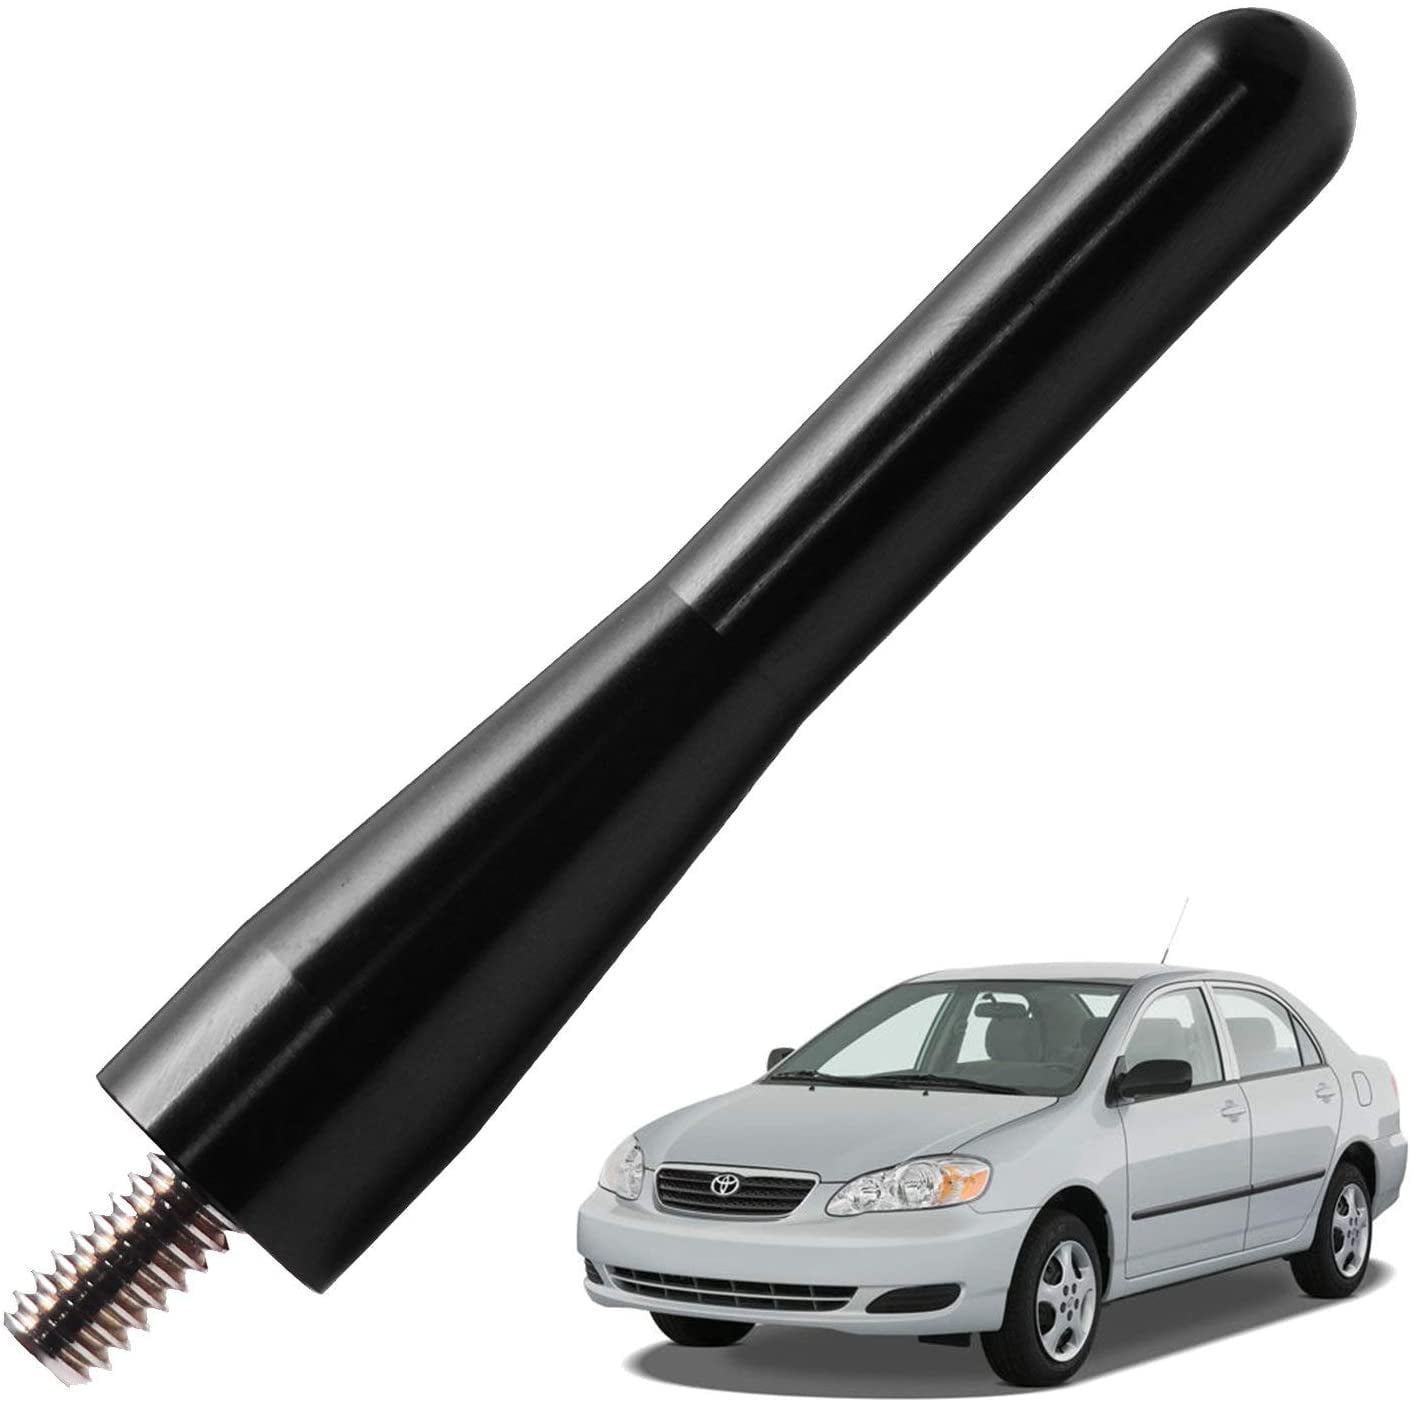 5.25 inches-Blue JAPower Replacement Antenna Compatible with Dodge Nitro 2007-2010